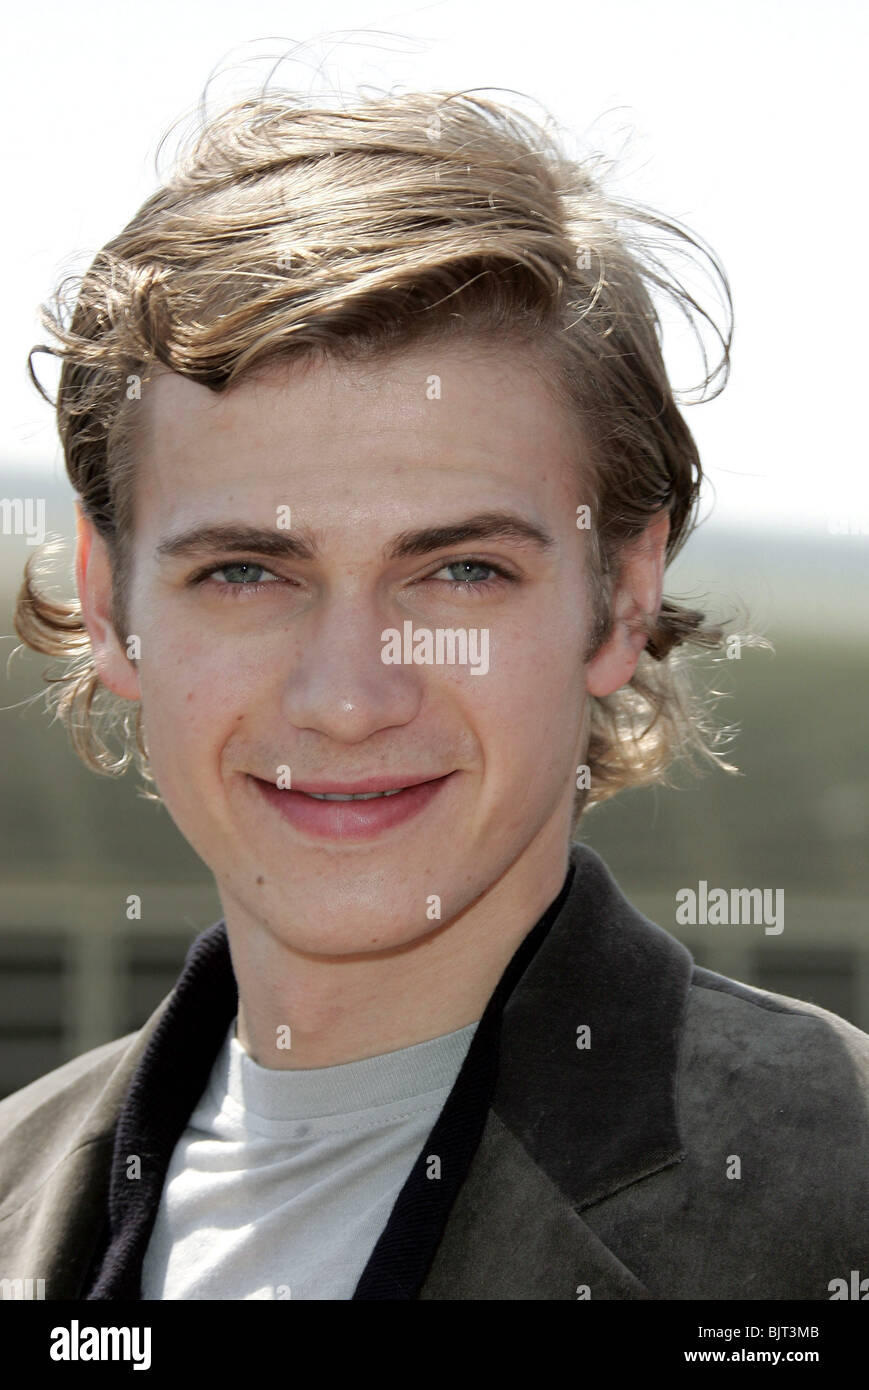 HAYDEN CHRISTENSEN CANNES FILM FESTIVAL 2005 CANNES FRANCE 16 May 2005 Stock Photo